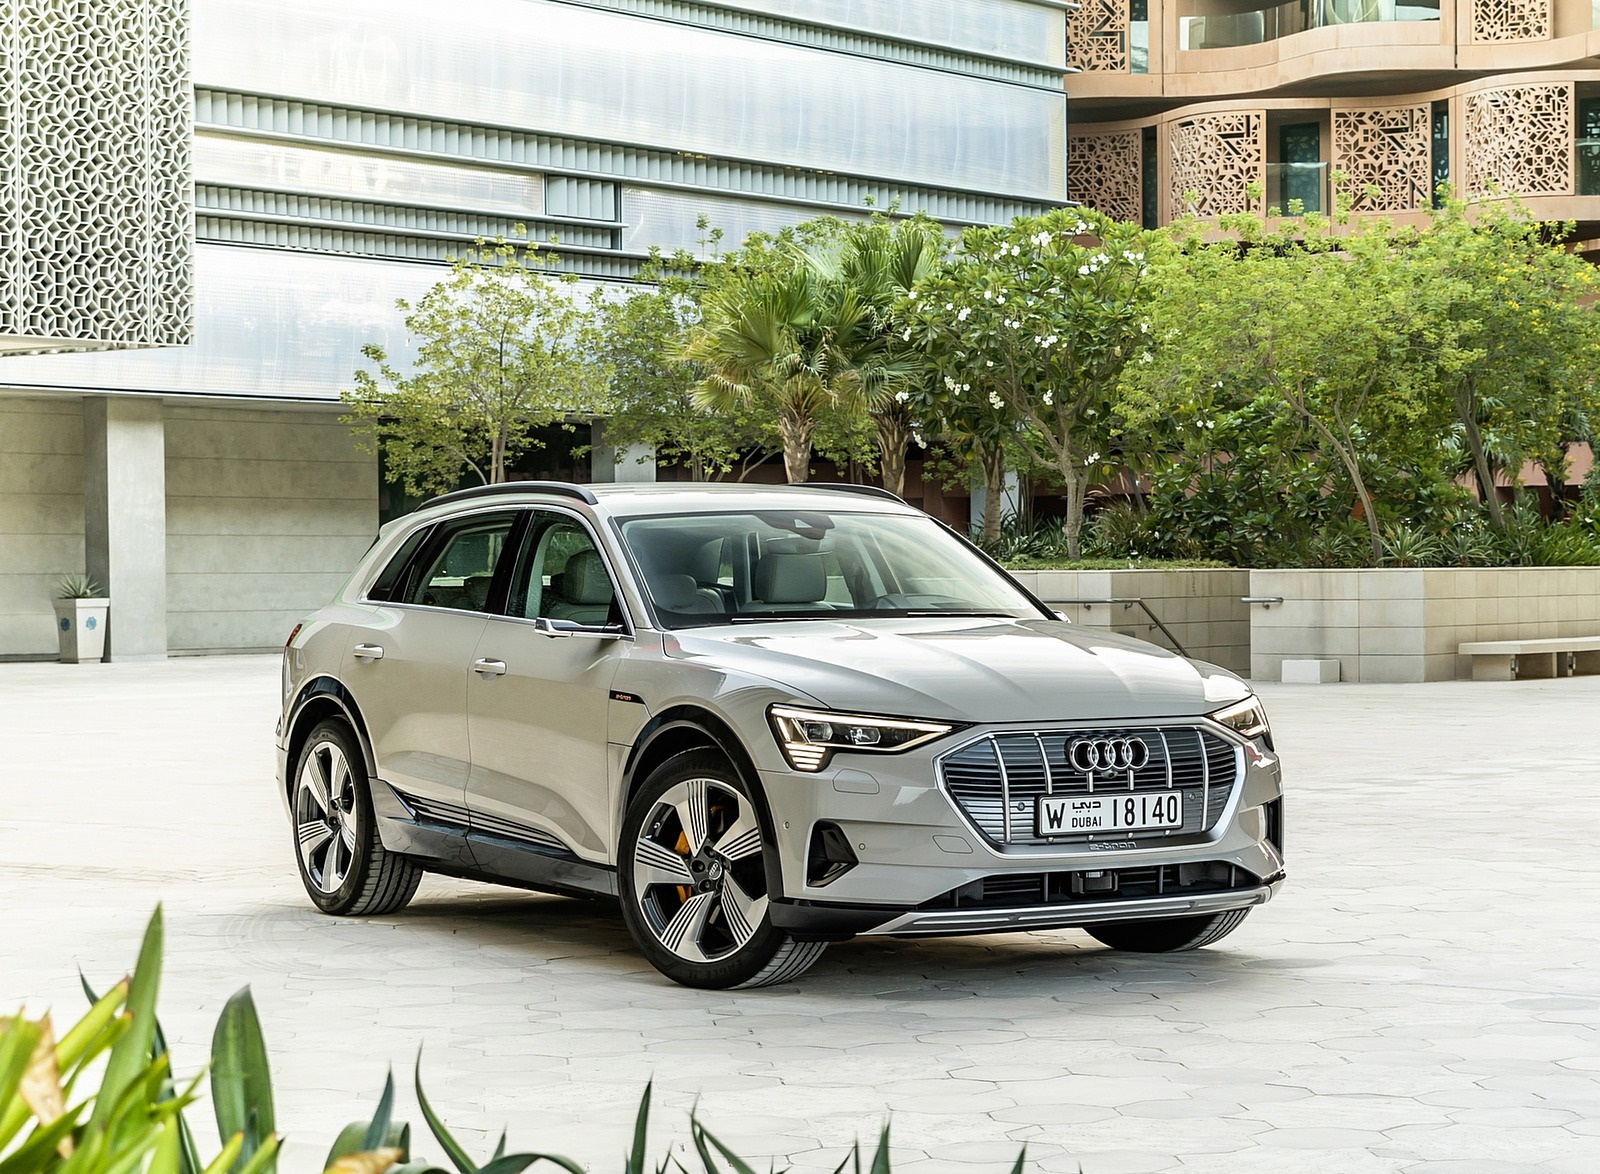 2019 Audi e-tron (Color: Siam Beige) Front Three-Quarter Wallpapers #176 of 234